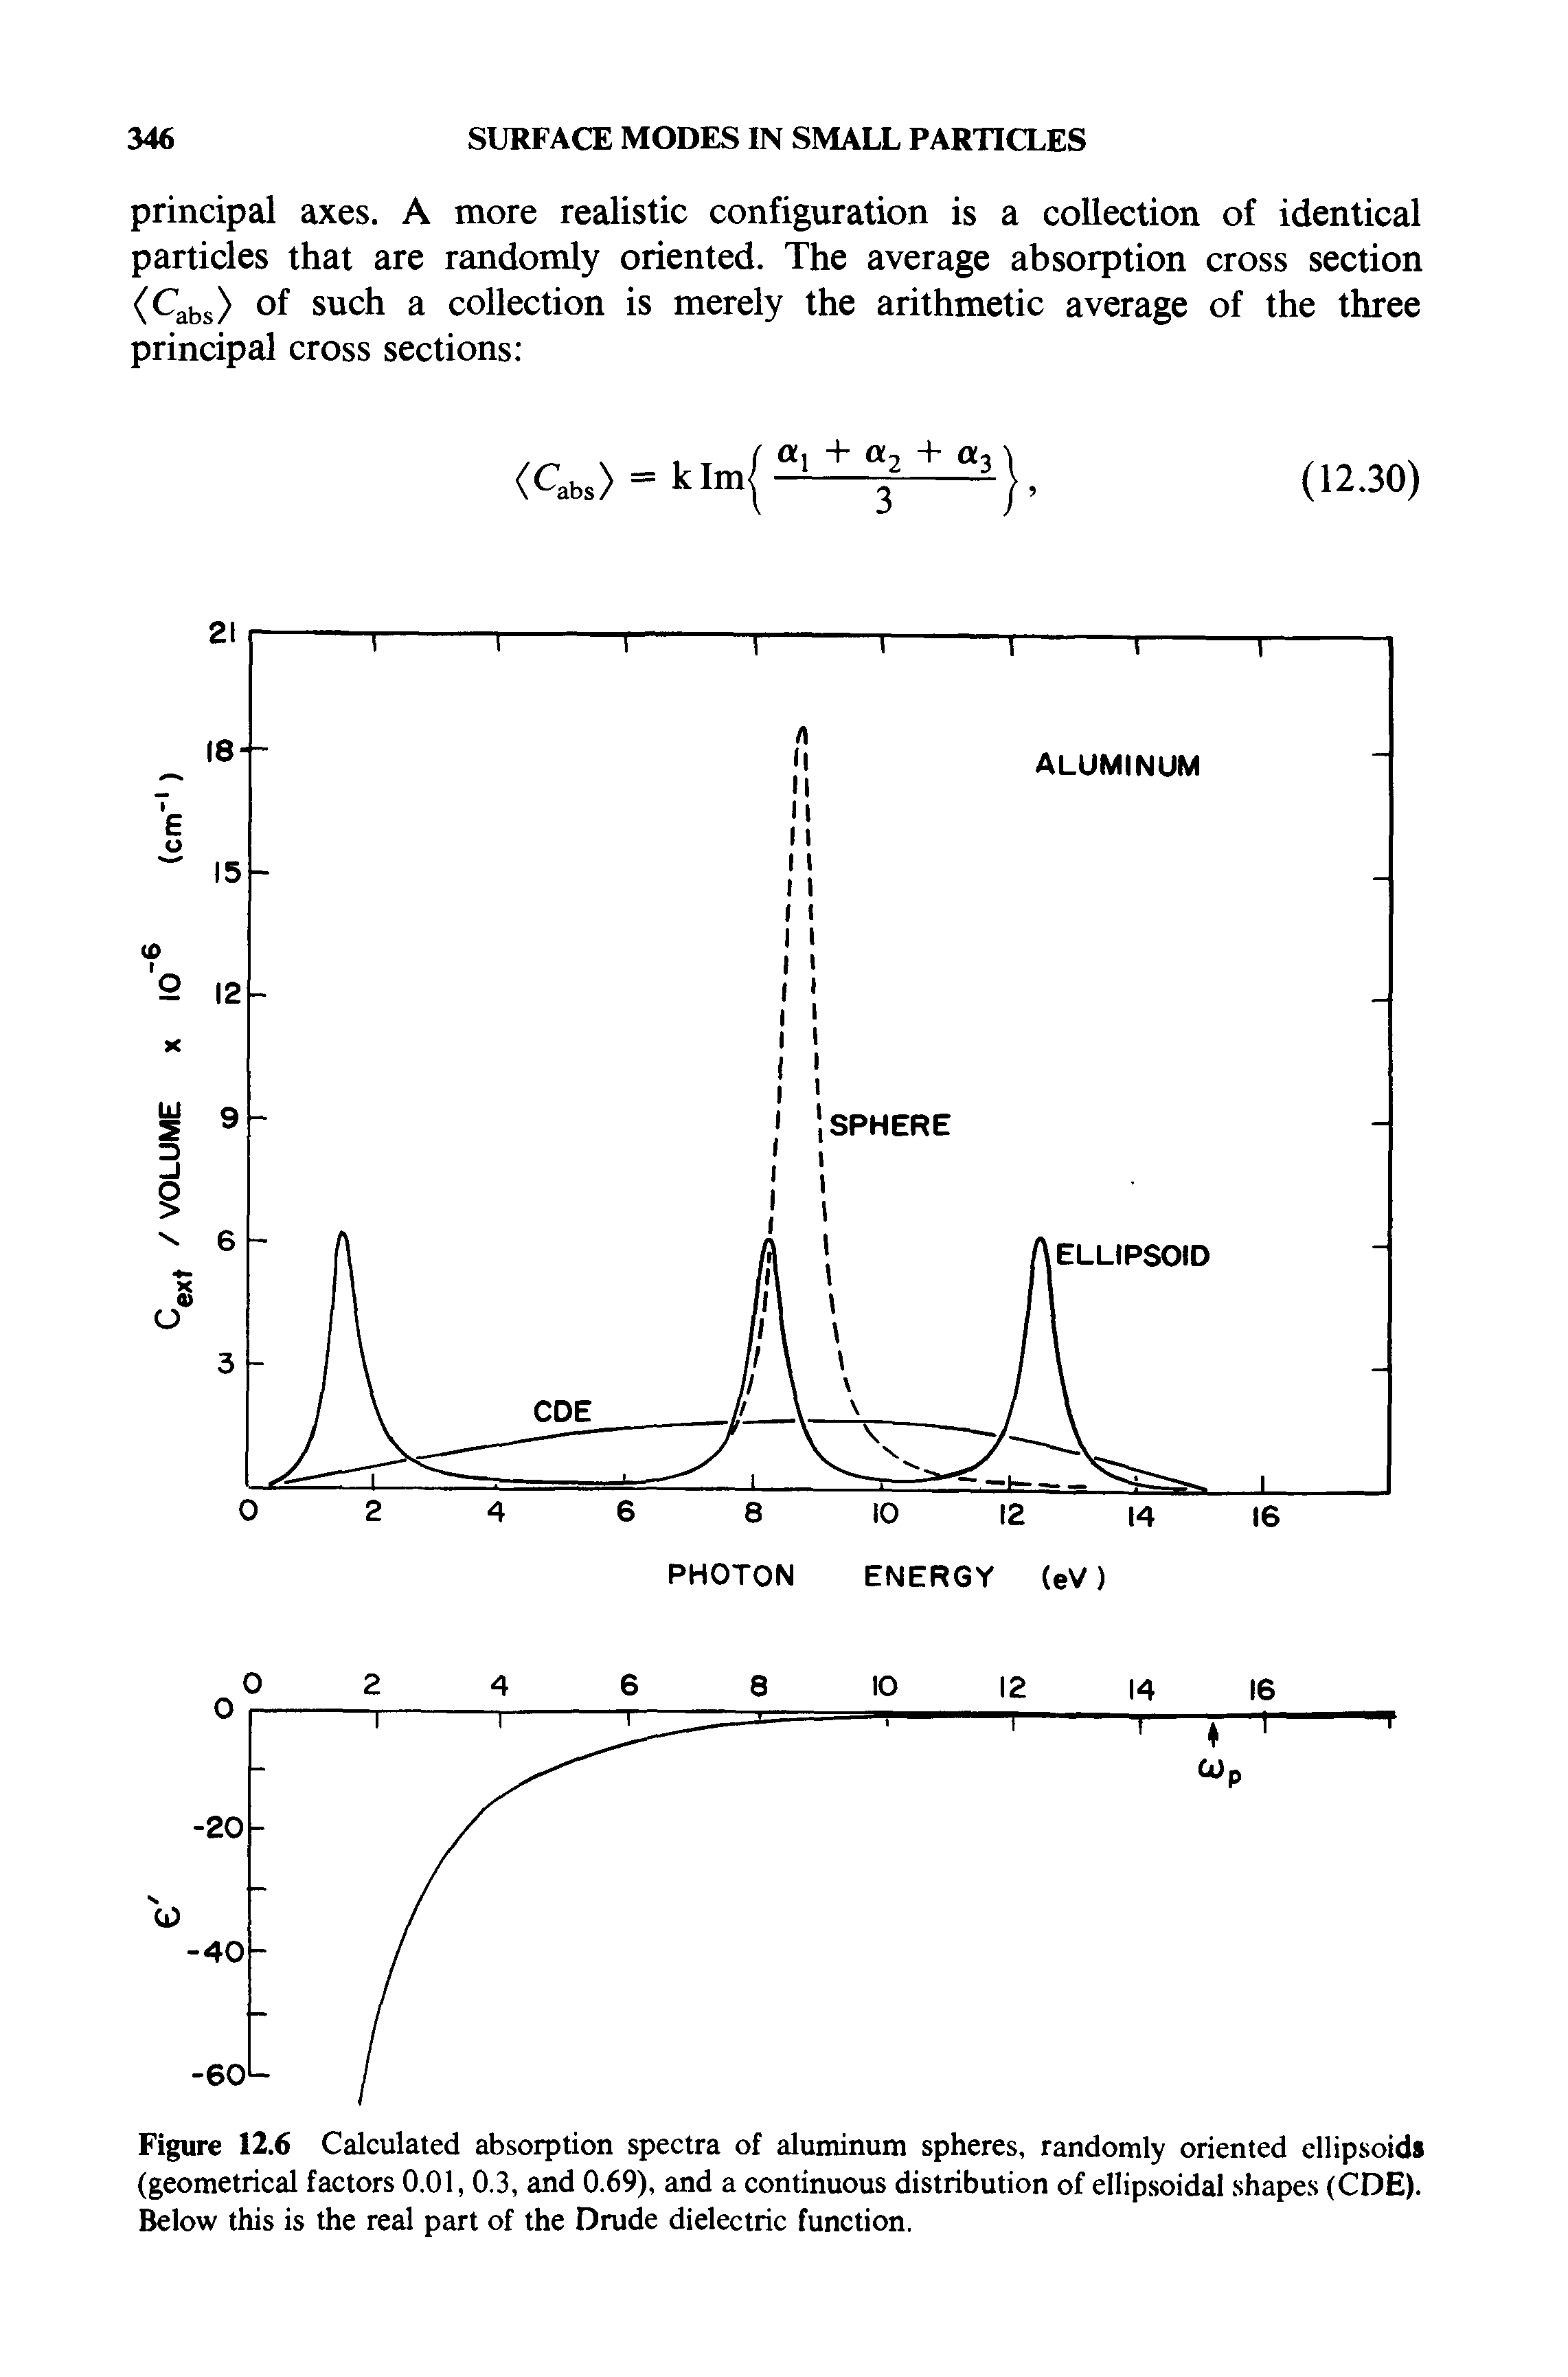 Figure 12.6 Calculated absorption spectra of aluminum spheres, randomly oriented ellipsoids (geometrical factors 0.01, 0.3, and 0.69), and a continuous distribution of ellipsoidal shapes (CDE). Below this is the real part of the Drude dielectric function.